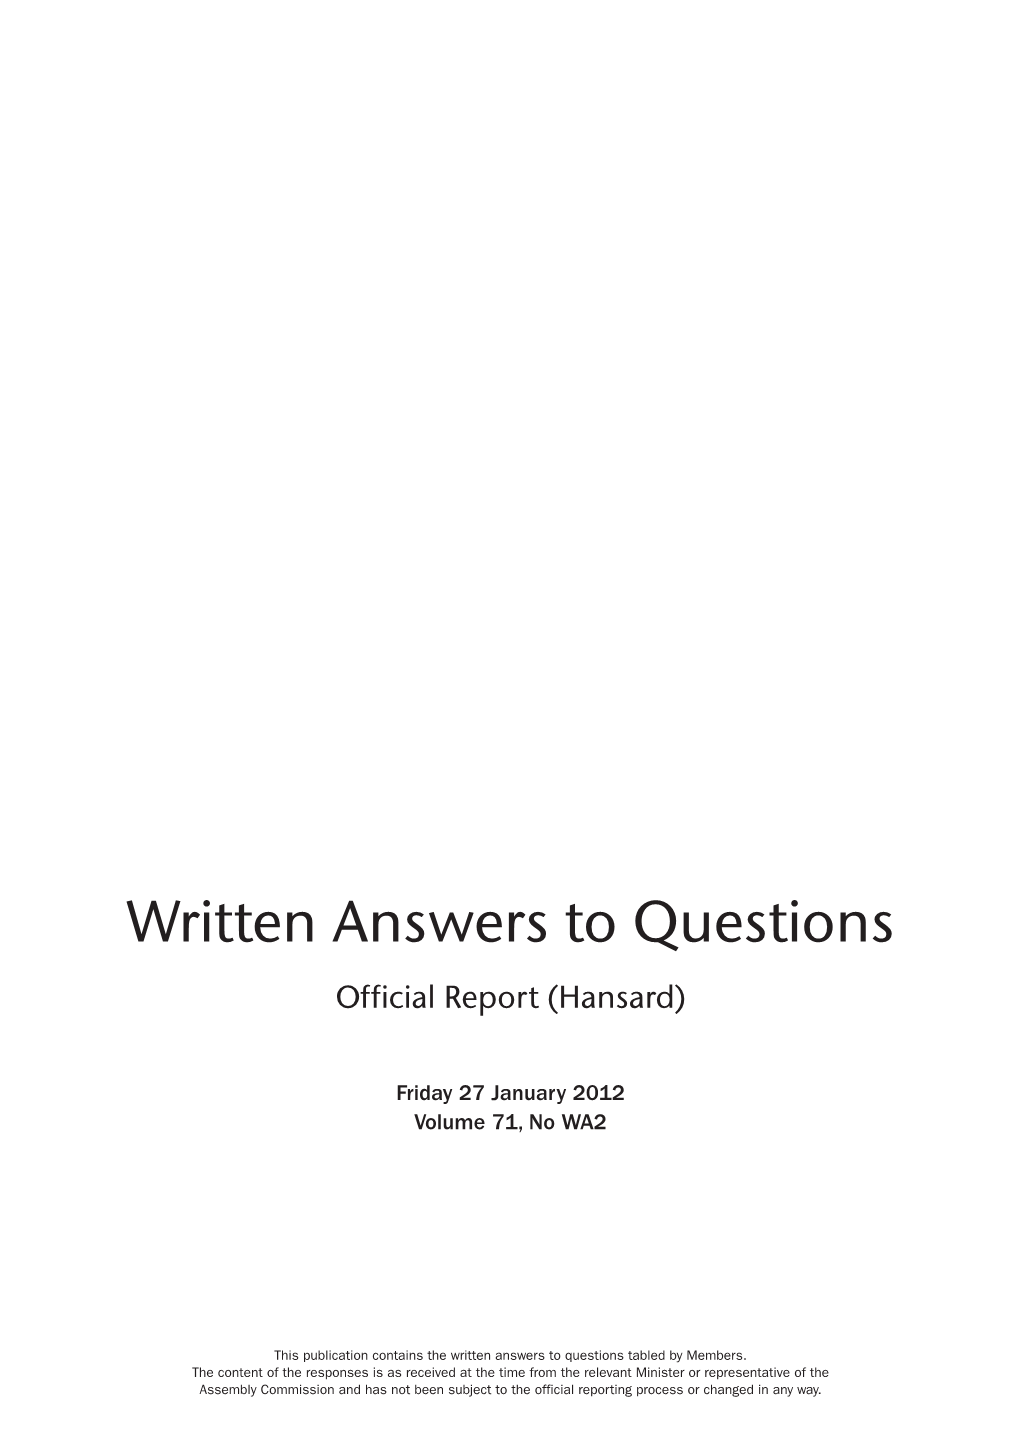 Revised Written Answers